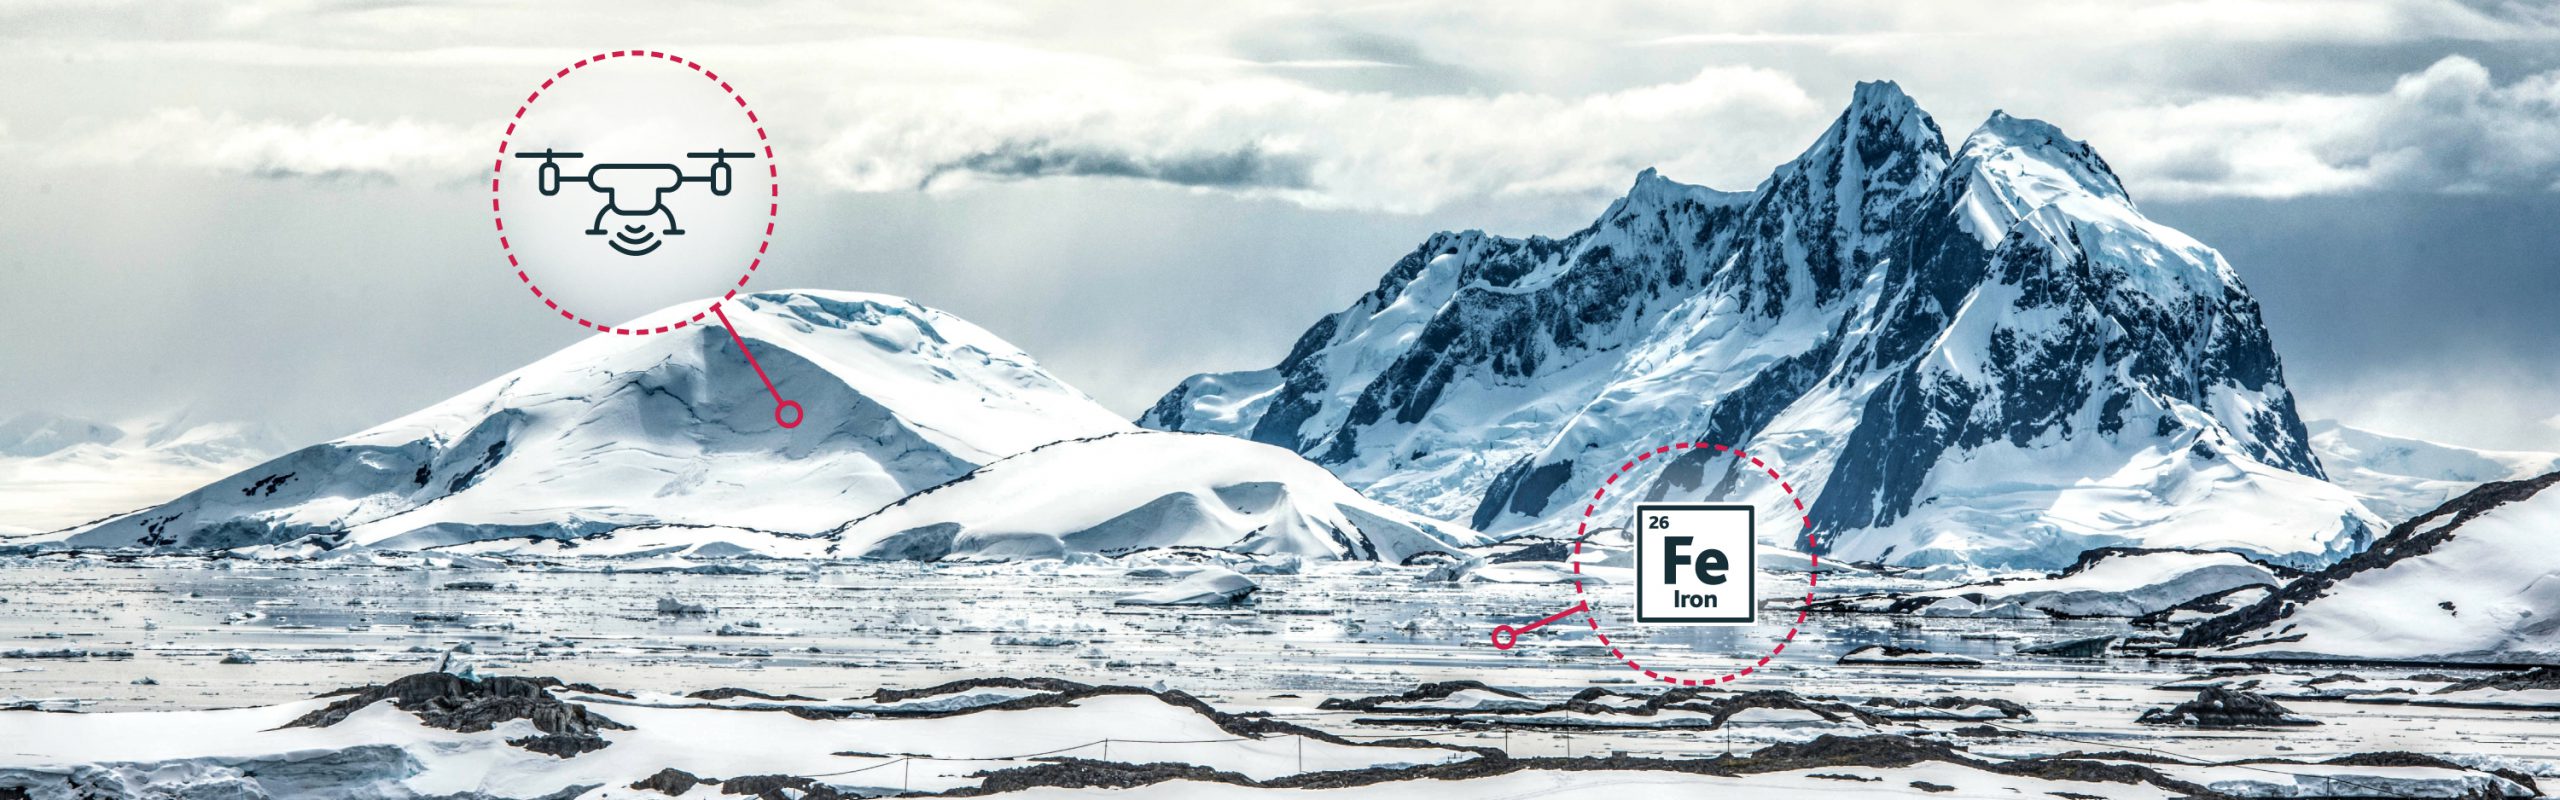 Snow covered mountains and arctic ice in the background. In the foreground an icon of a drone and the chemical symbol for Iron